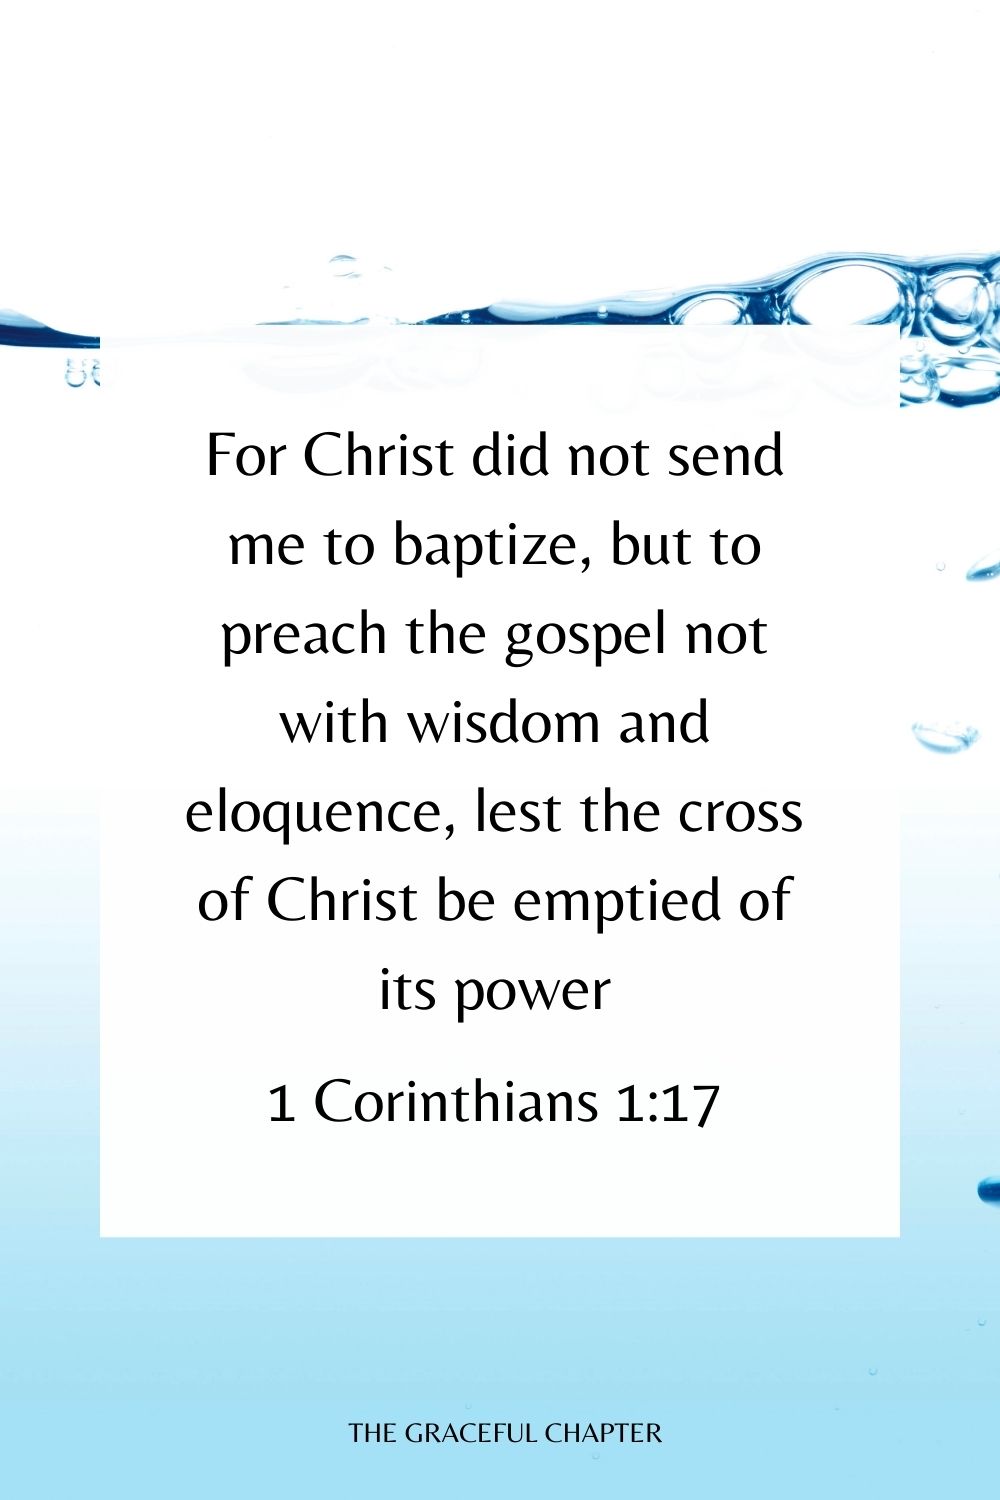 For Christ did not send me to baptize, but to preach the gospel not with wisdom and eloquence, lest the cross of Christ be emptied of its power. 1 Corinthians 1:17